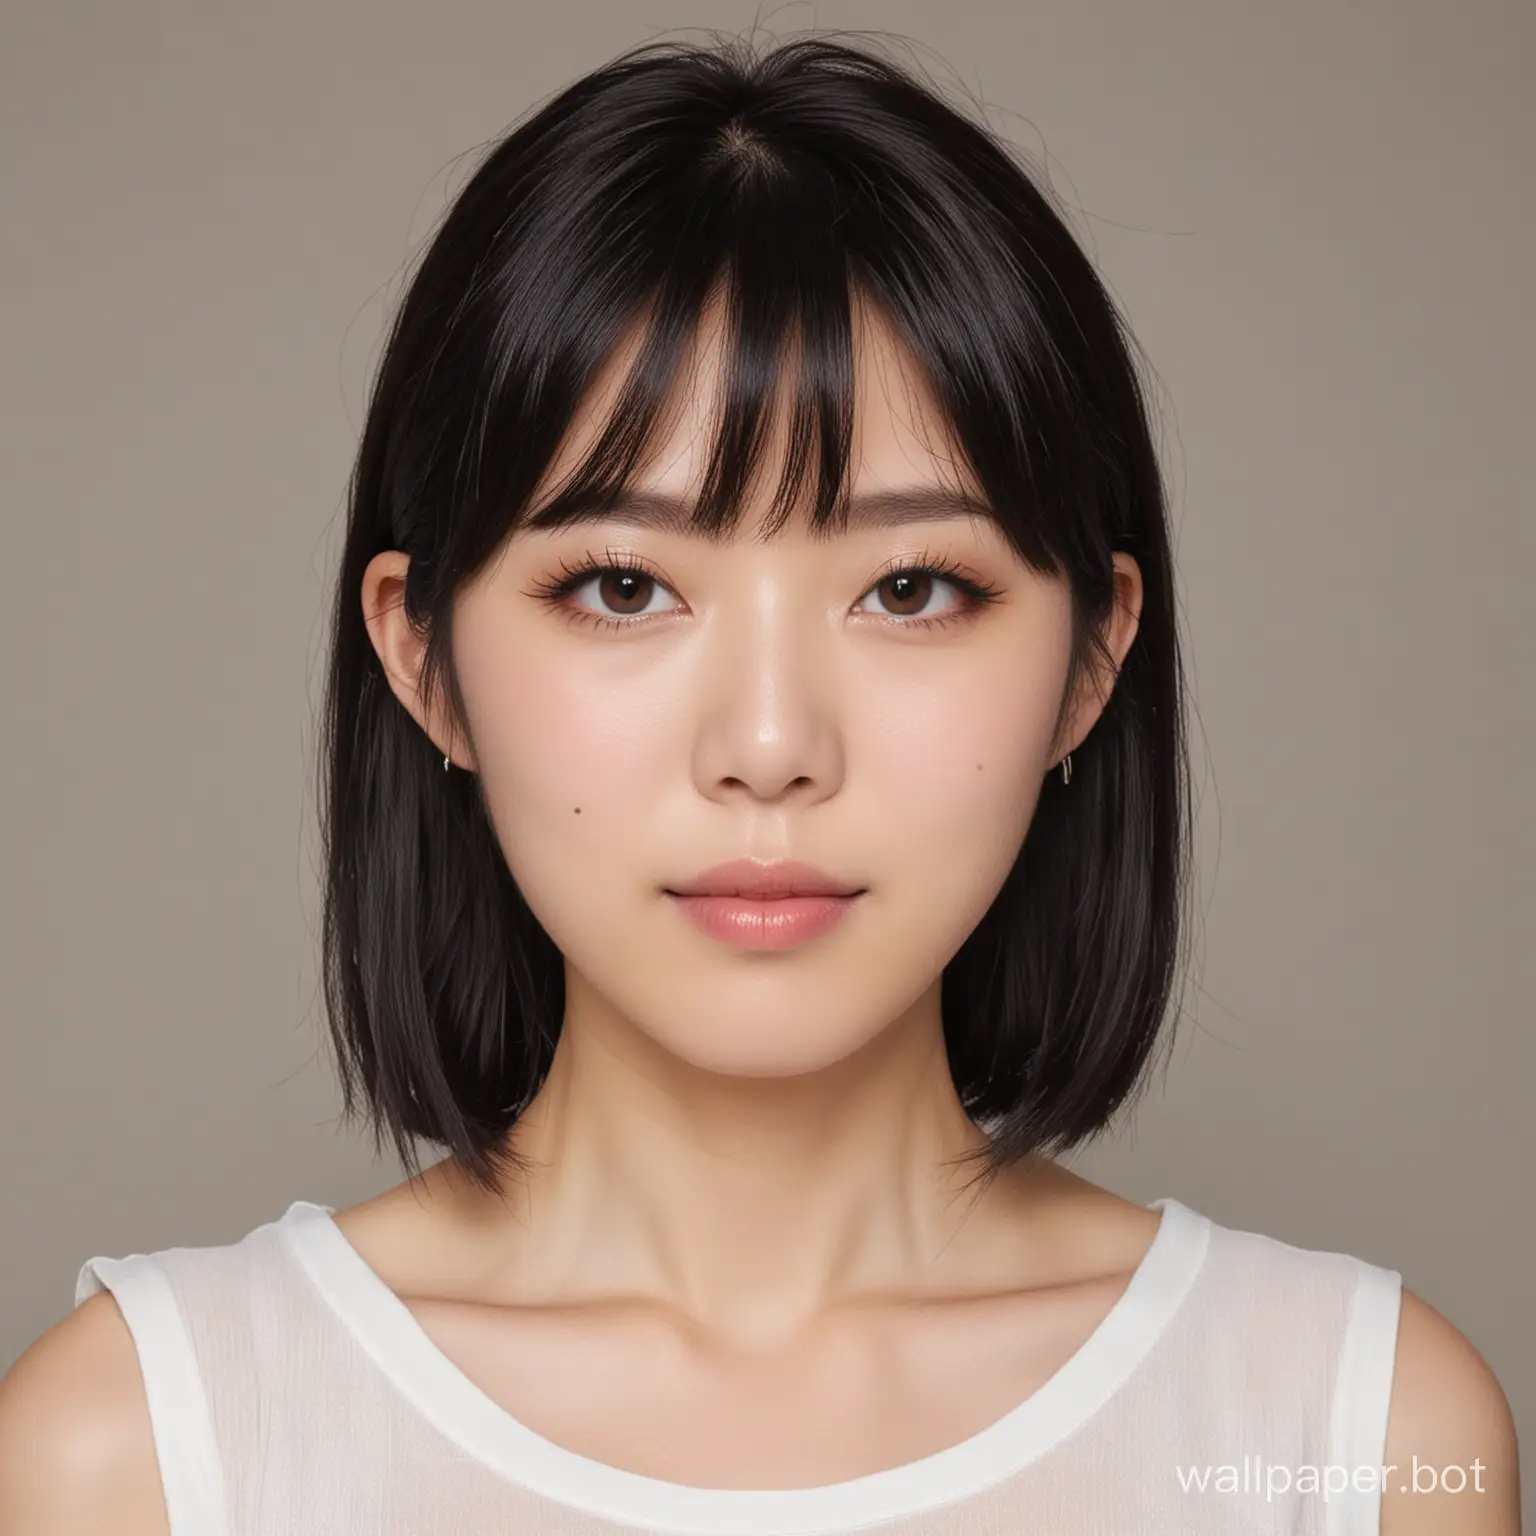 interview  photo of a single person，female japanese face, white skins, medium black hair